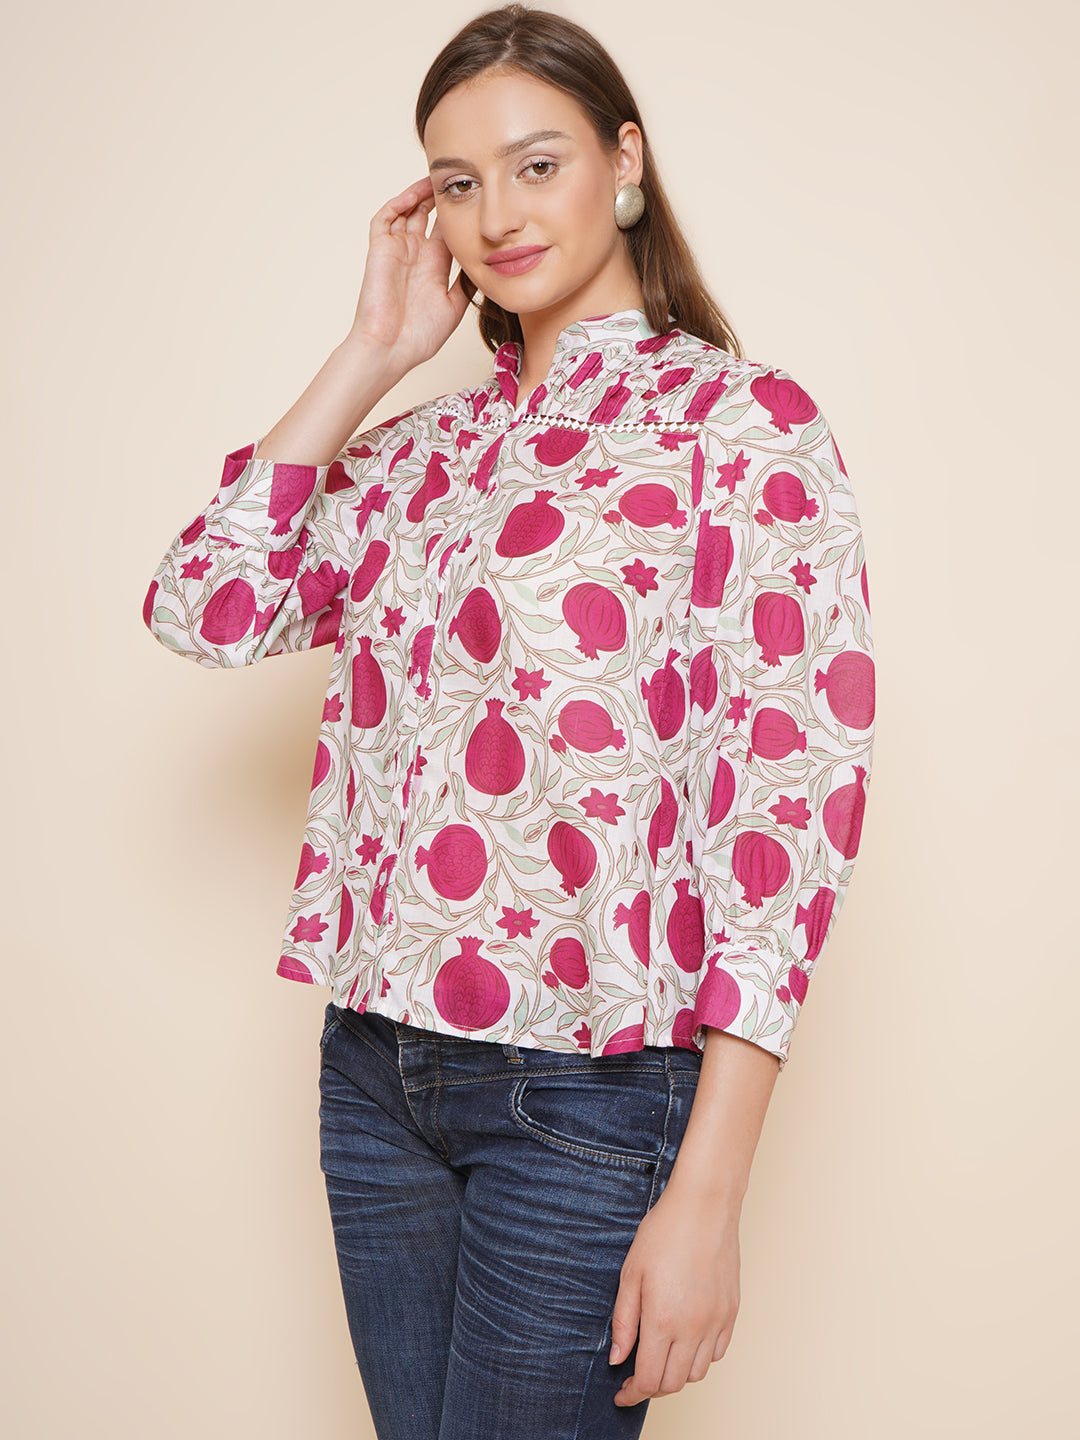 Bhama Couture Off White & Pink Printed Shirt Style Top